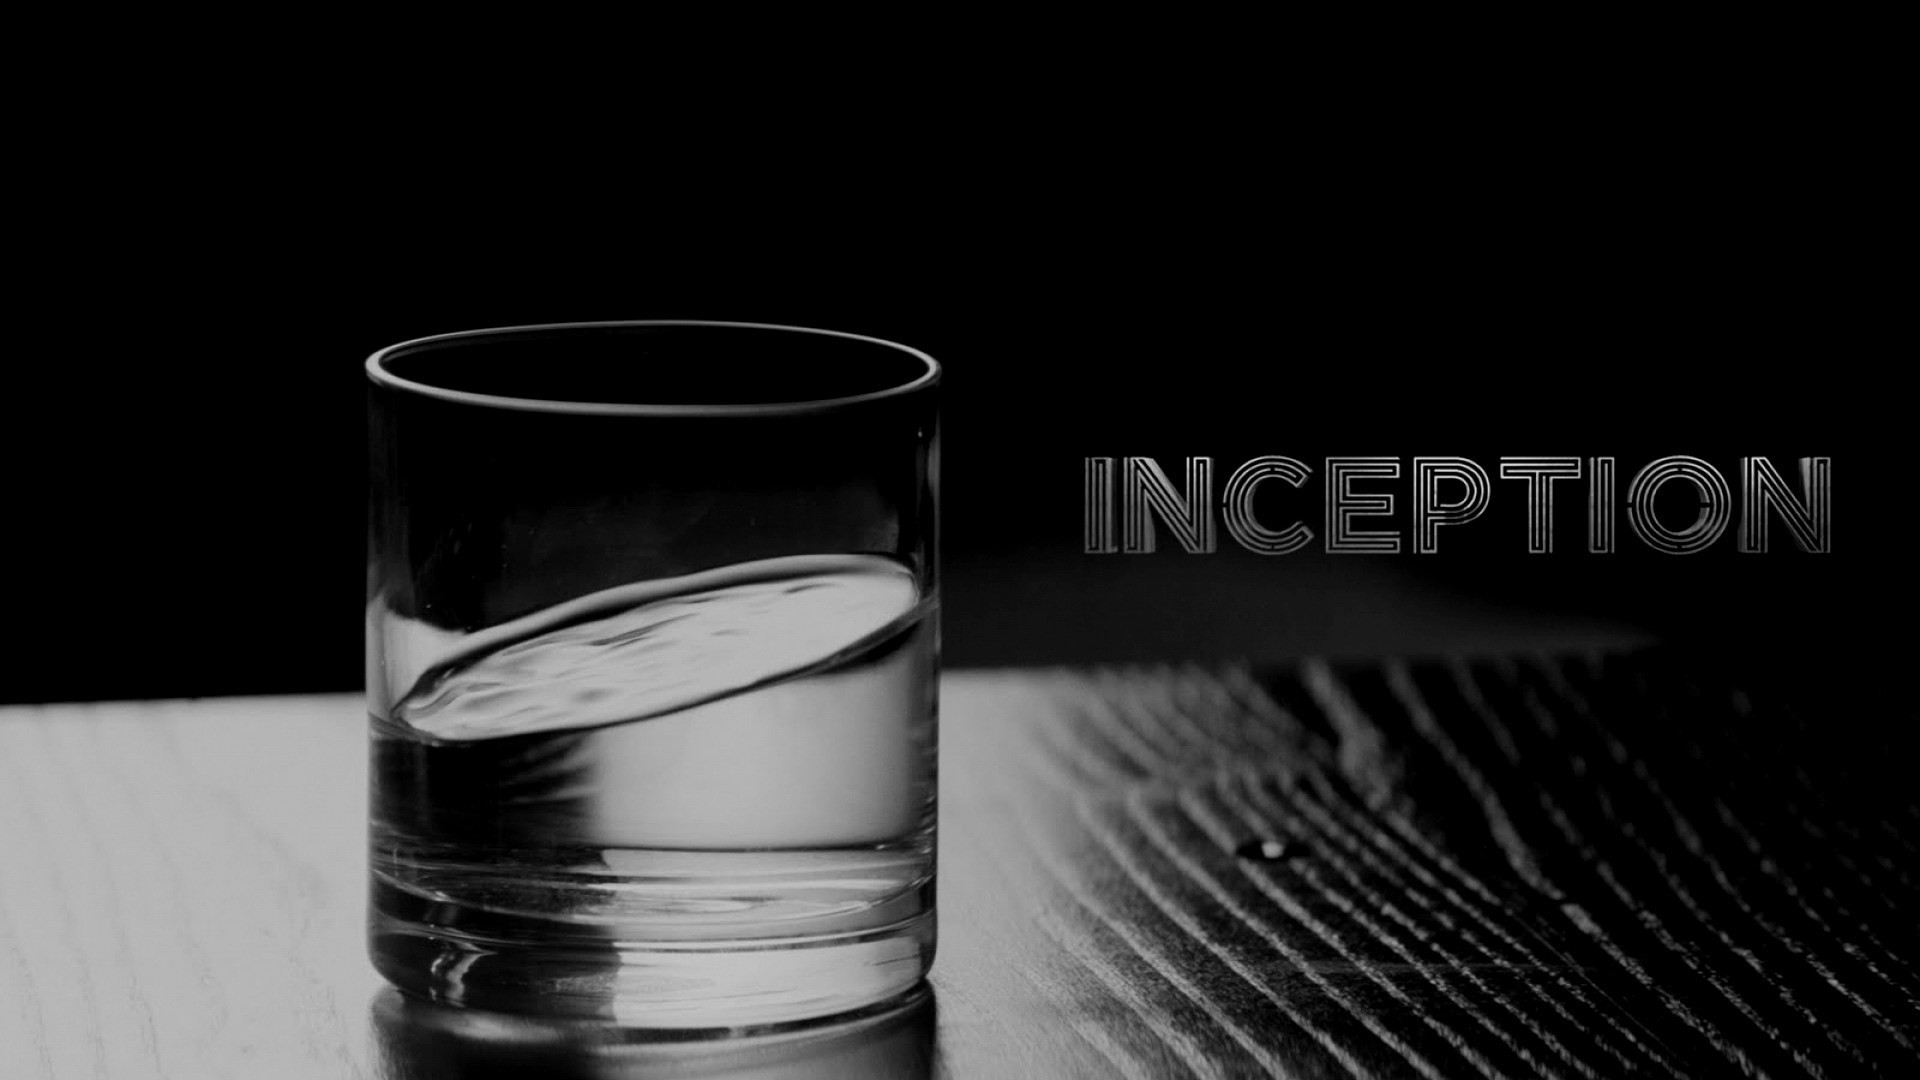 1920x1080 ... Inception - Wallpapers 8 ...